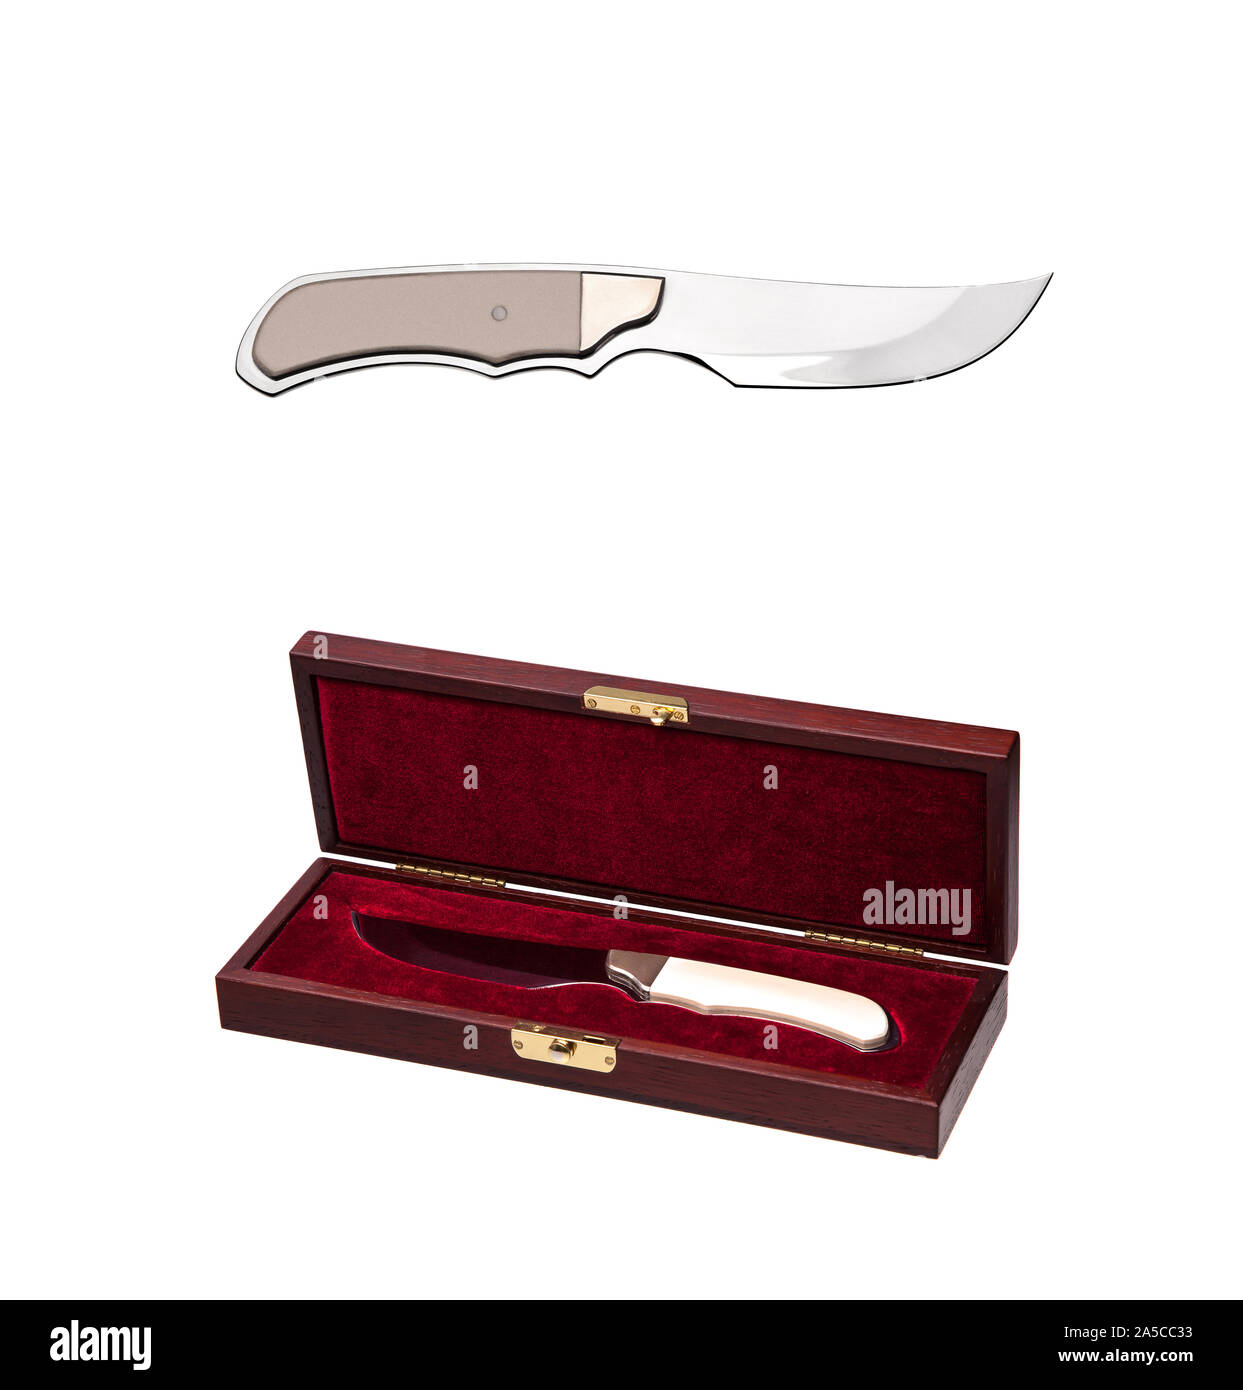 A hunting knife with an ivory handle in a gift wooden case isolate on a white background. Beautiful gift weapon on red velvet in a wooden casket. Stock Photo